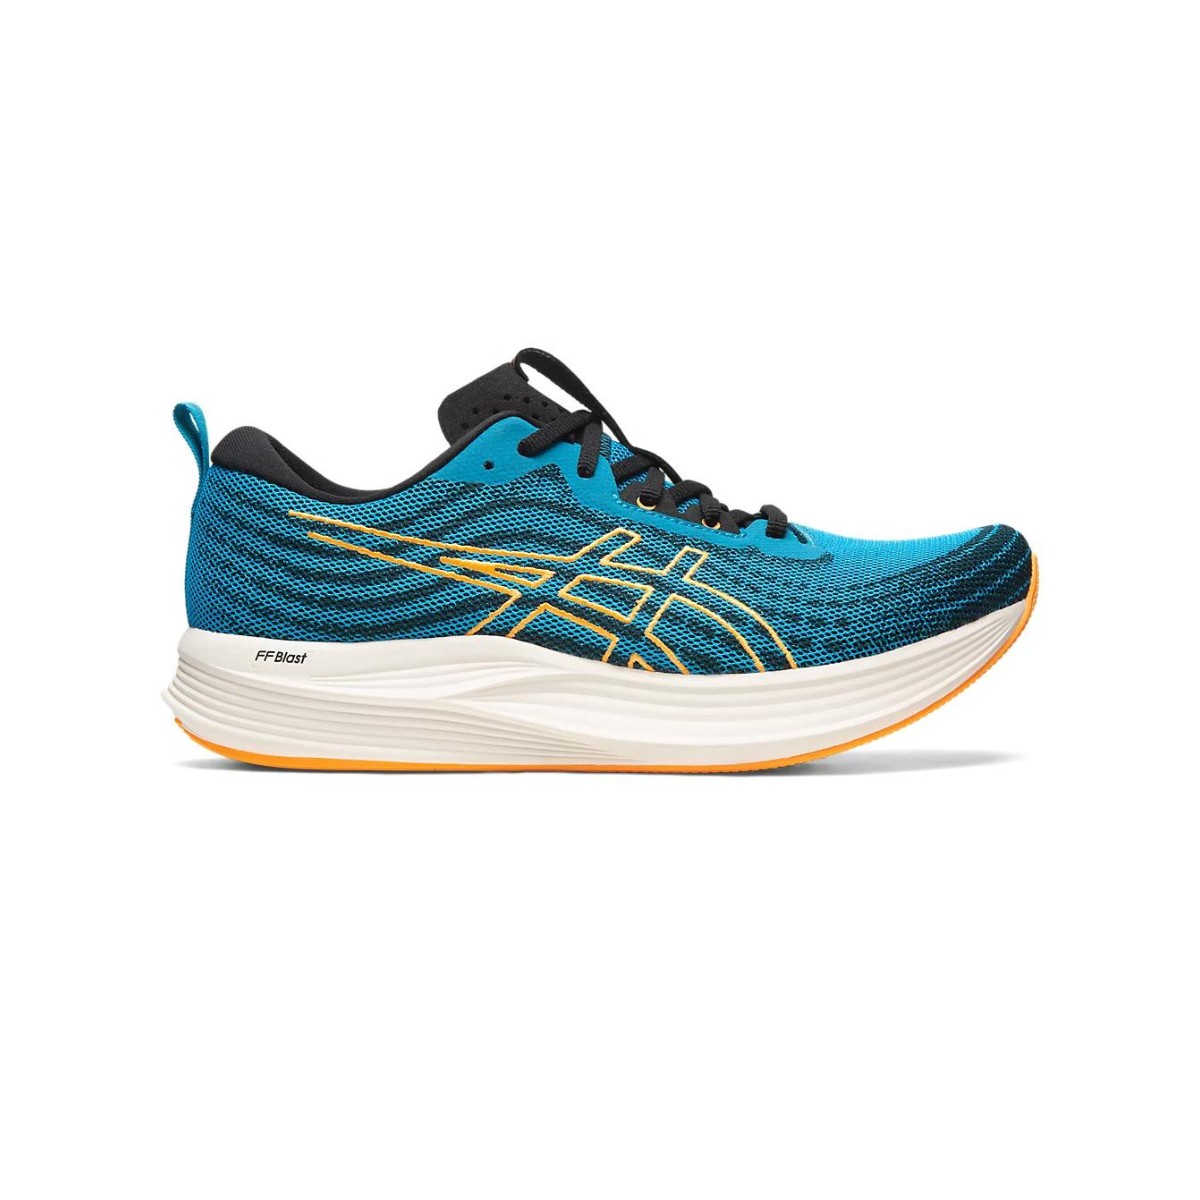 ASICS EvoRide SPEED, review y opiniones, Desde 85,65 €